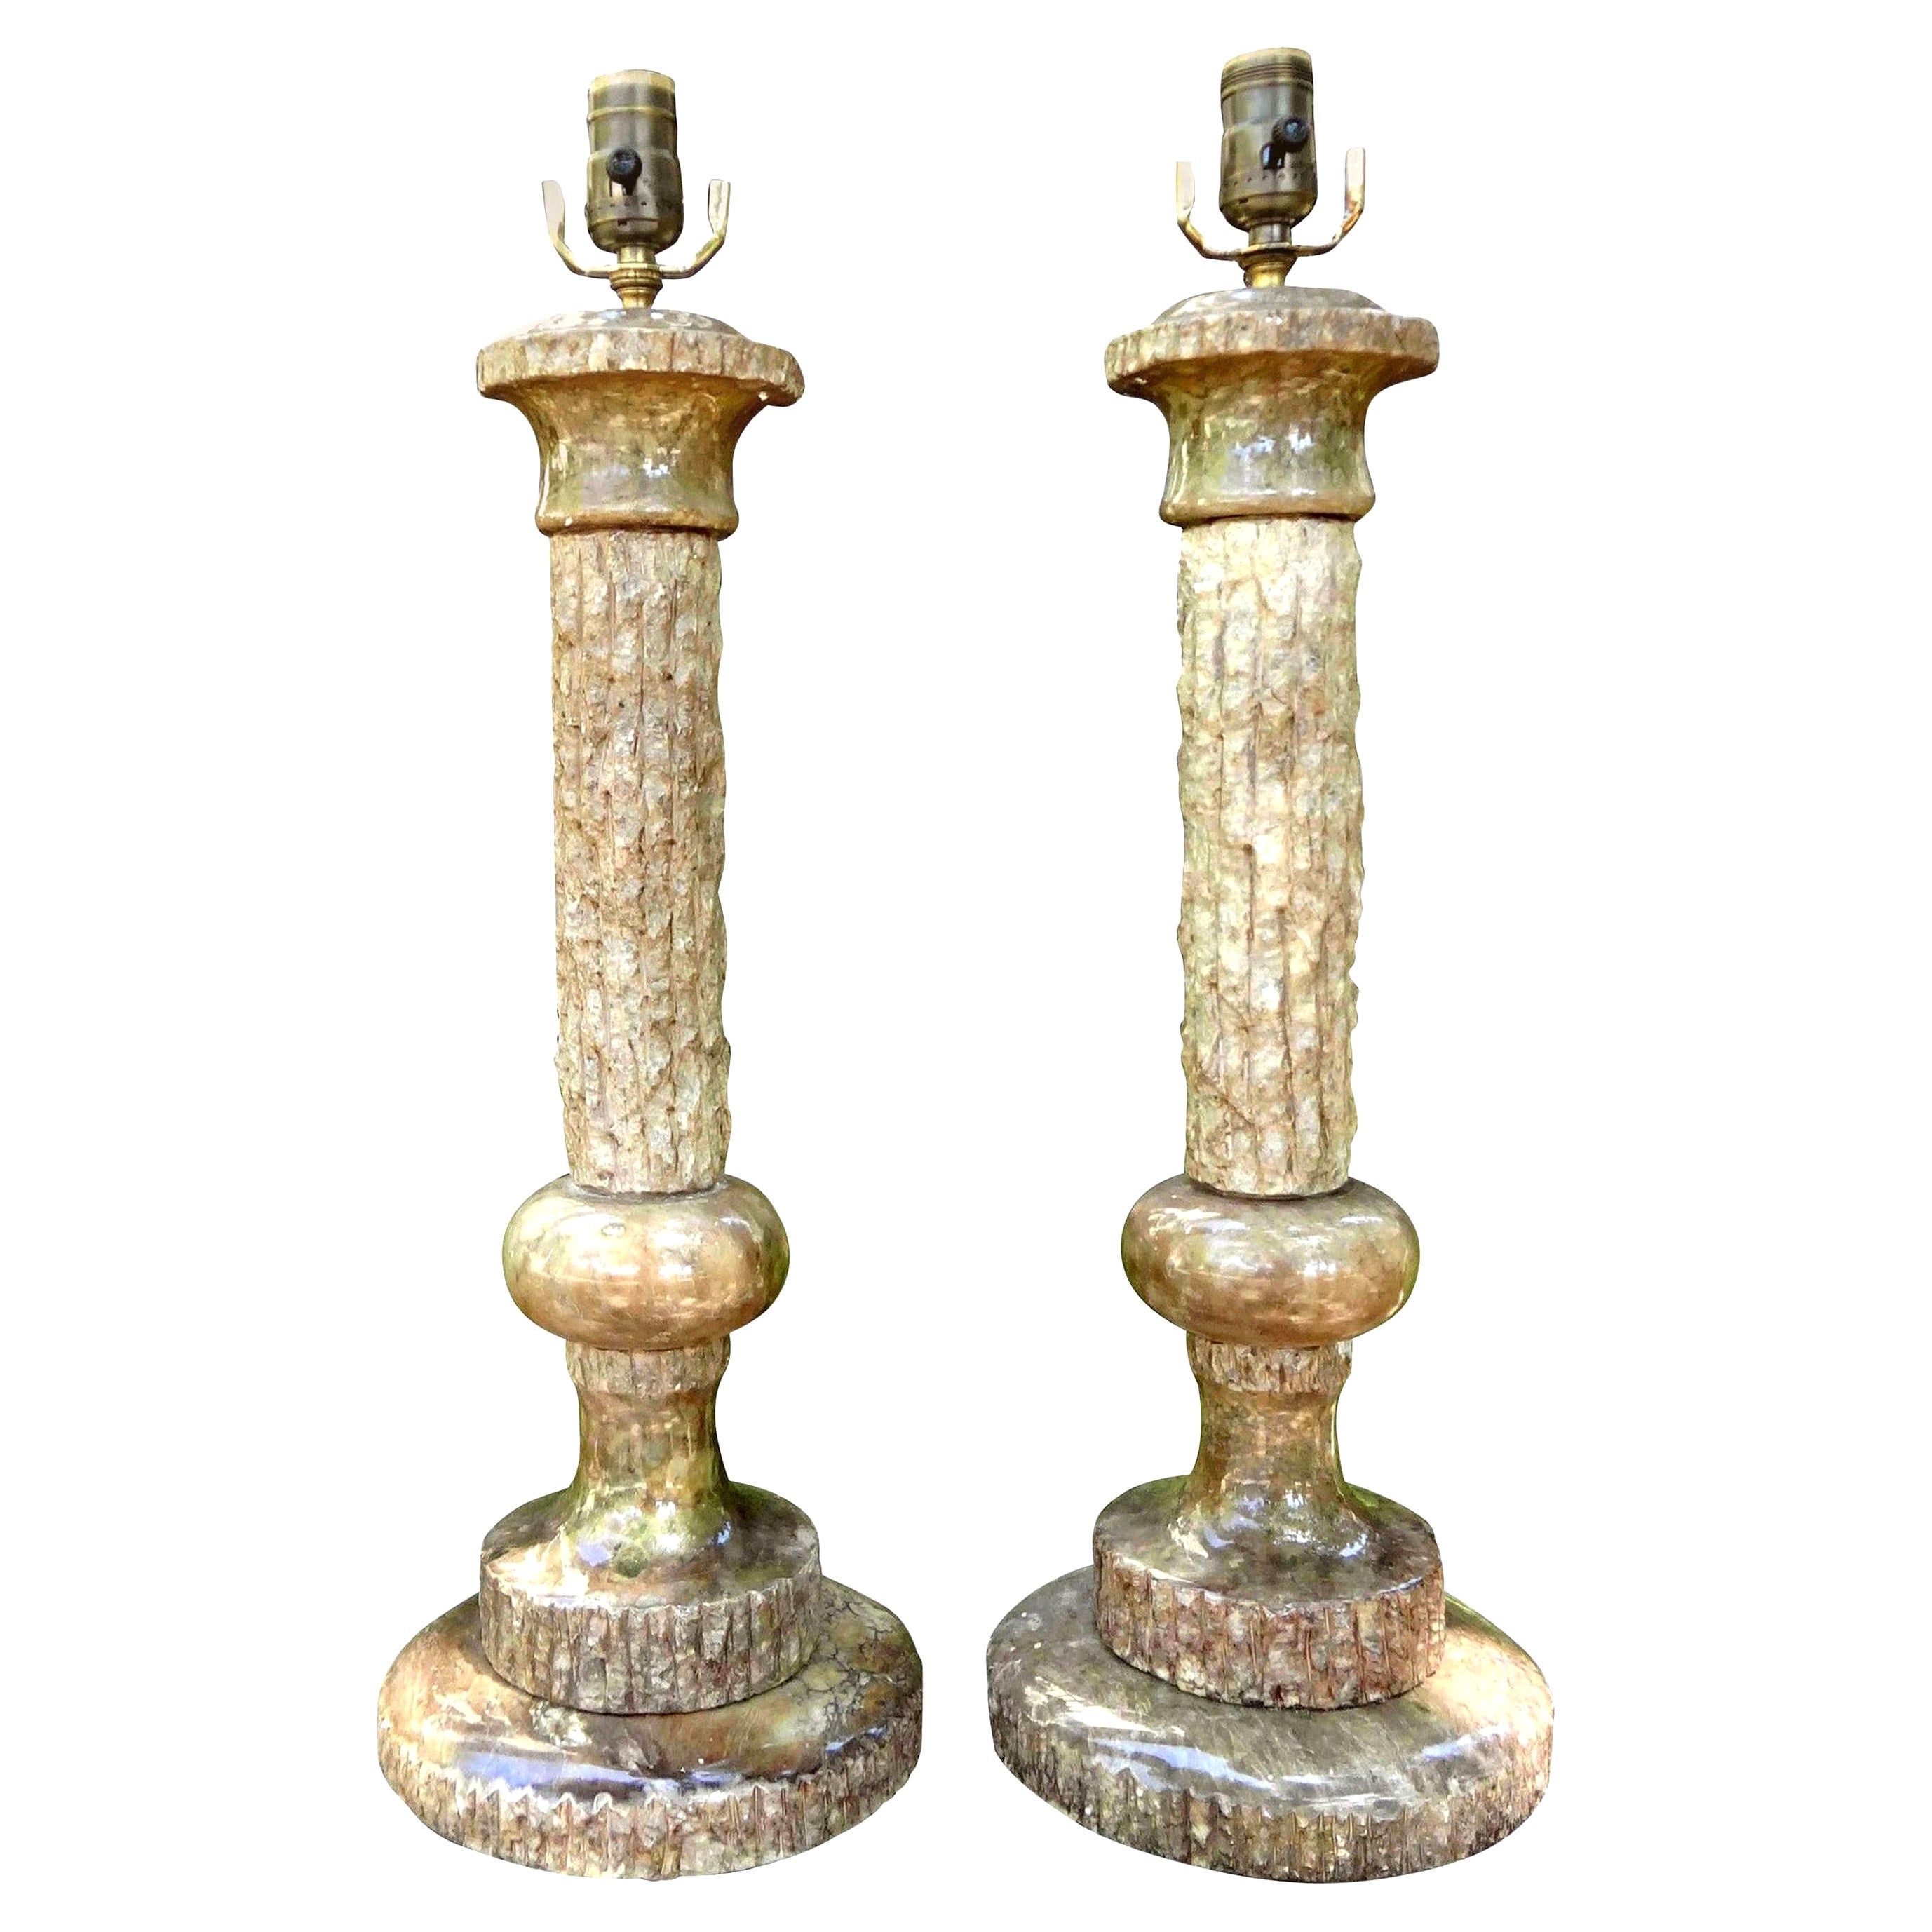 Pair of Midcentury Italian Faux Bois Marble Lamps